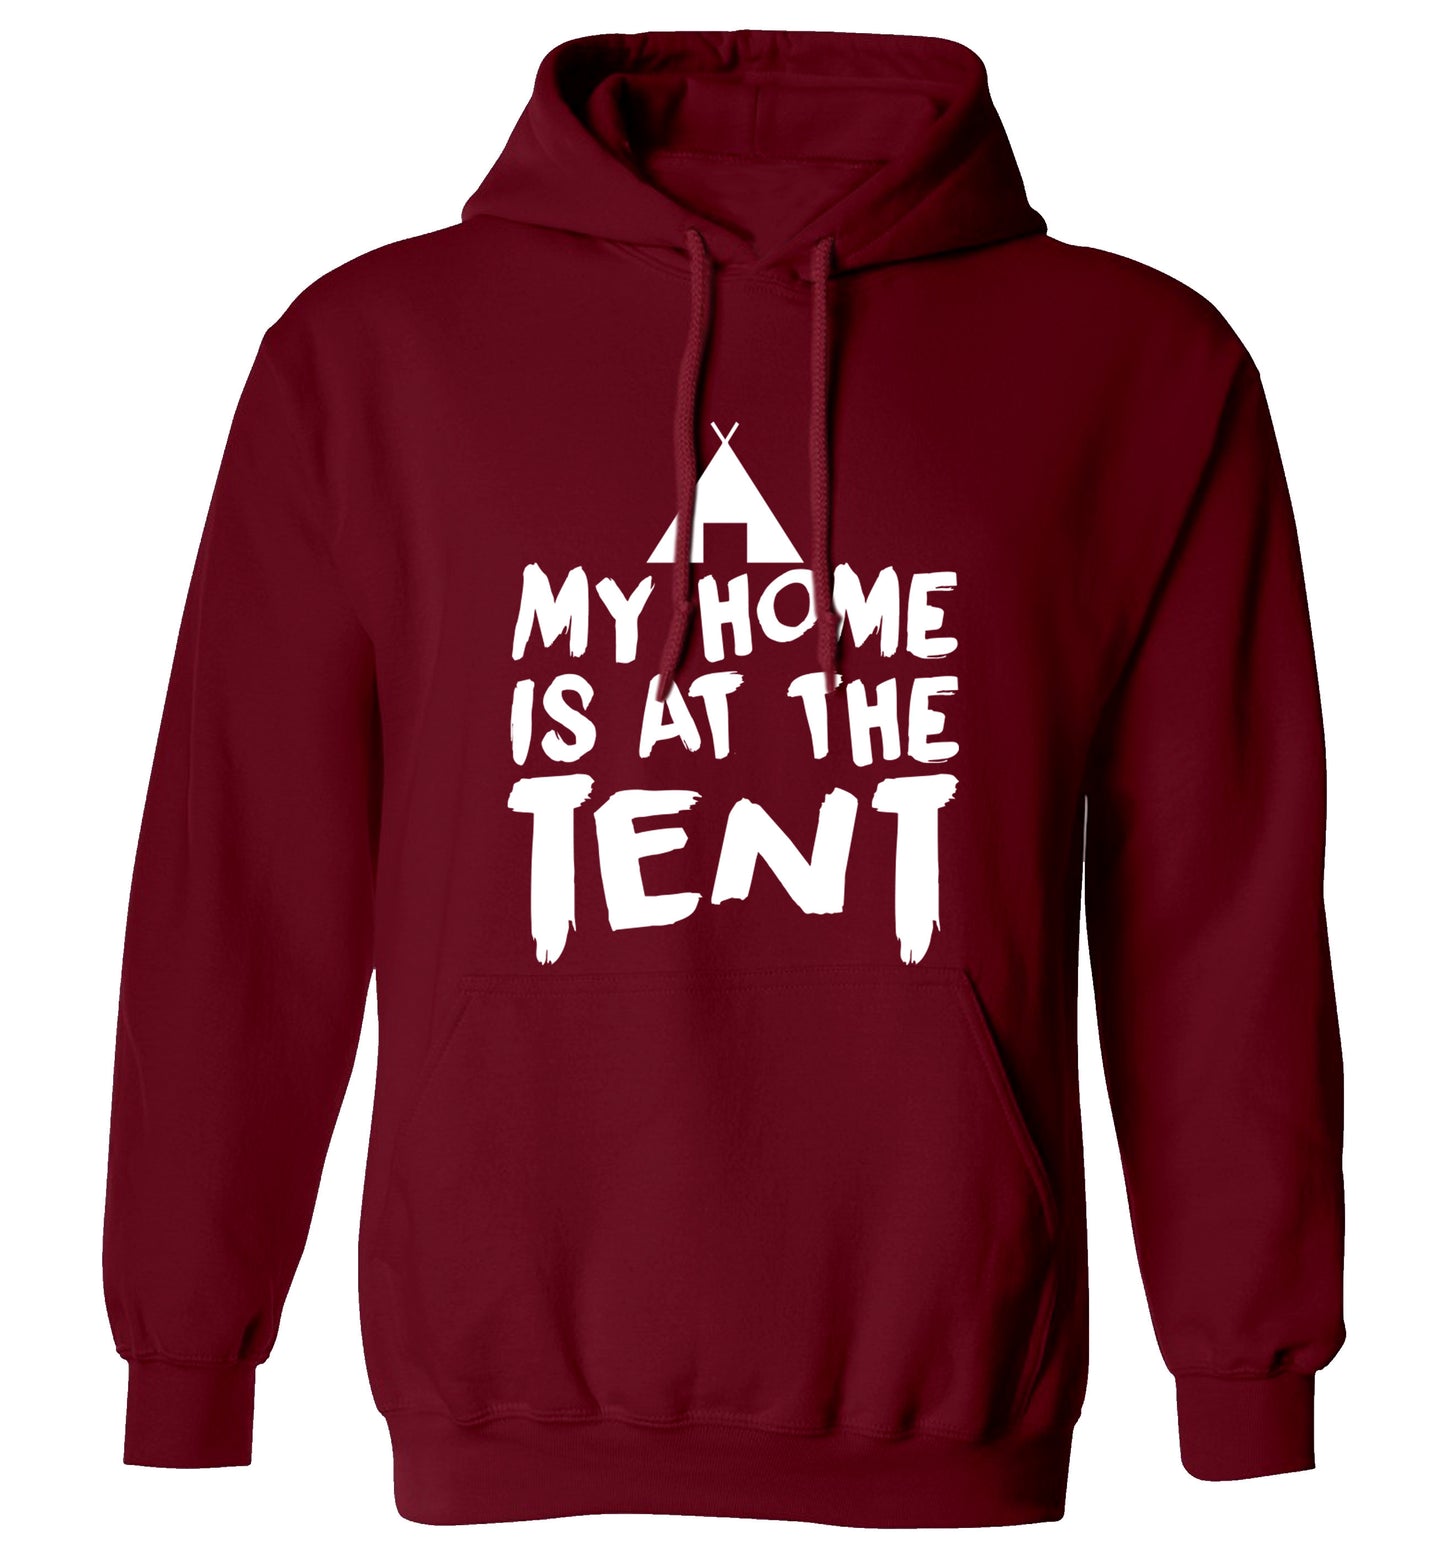 My home is at the tent adults unisex maroon hoodie 2XL